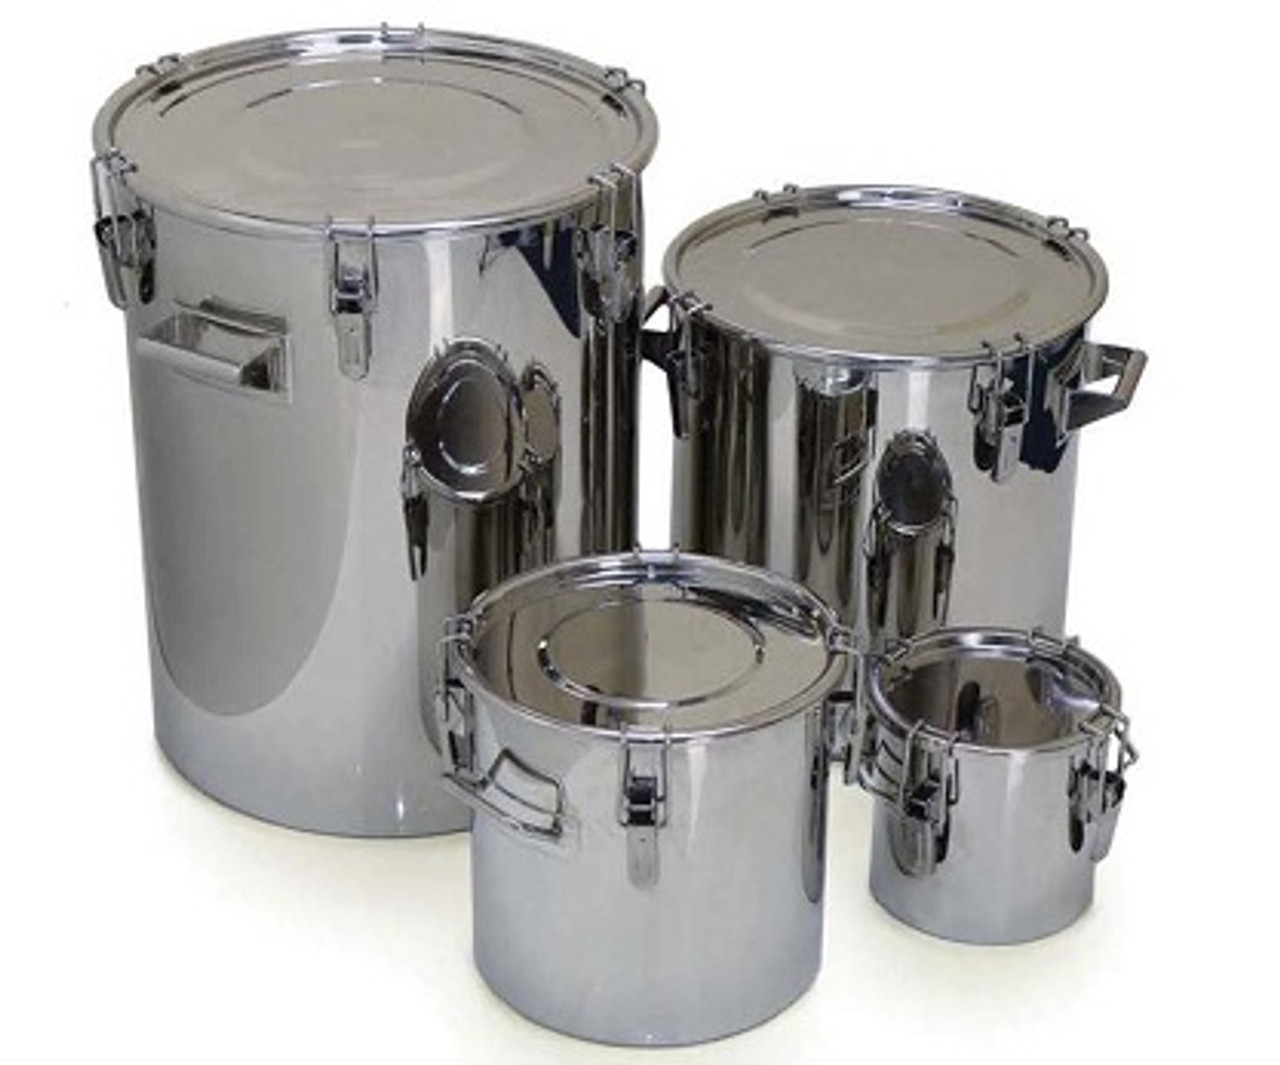 Multi purpose open top drums
• Heavy duty construction
• Crevice free interior
• 316L stainless steel body and lid
• Silicone gasket (food grade, FDA acceptable)
• Lid can be completely removed for full cleaning